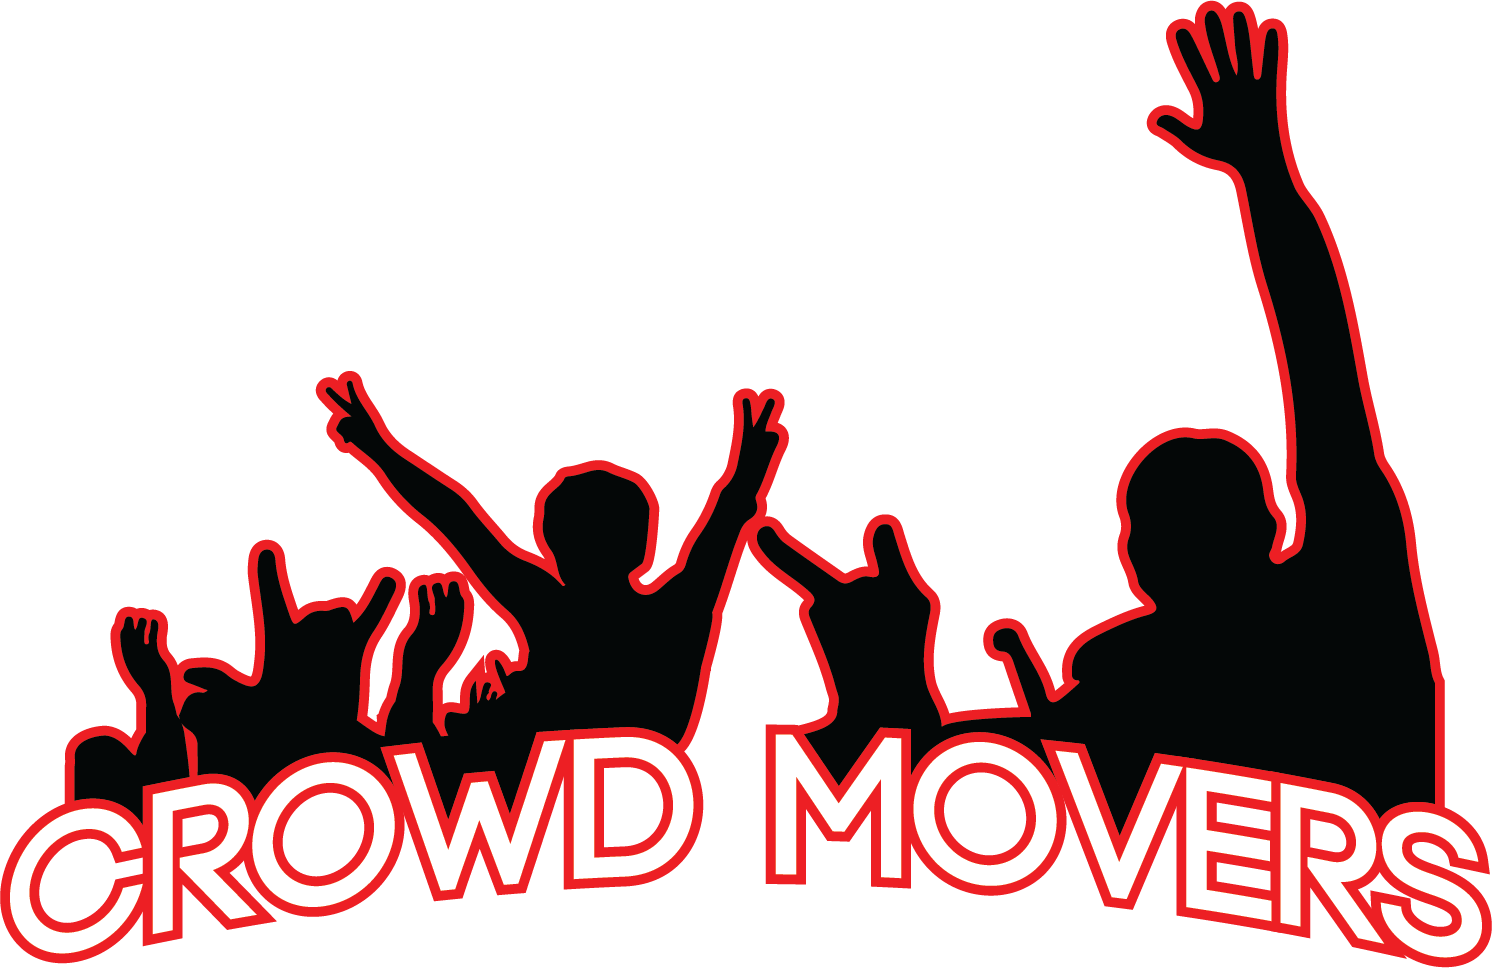 Crowd Movers